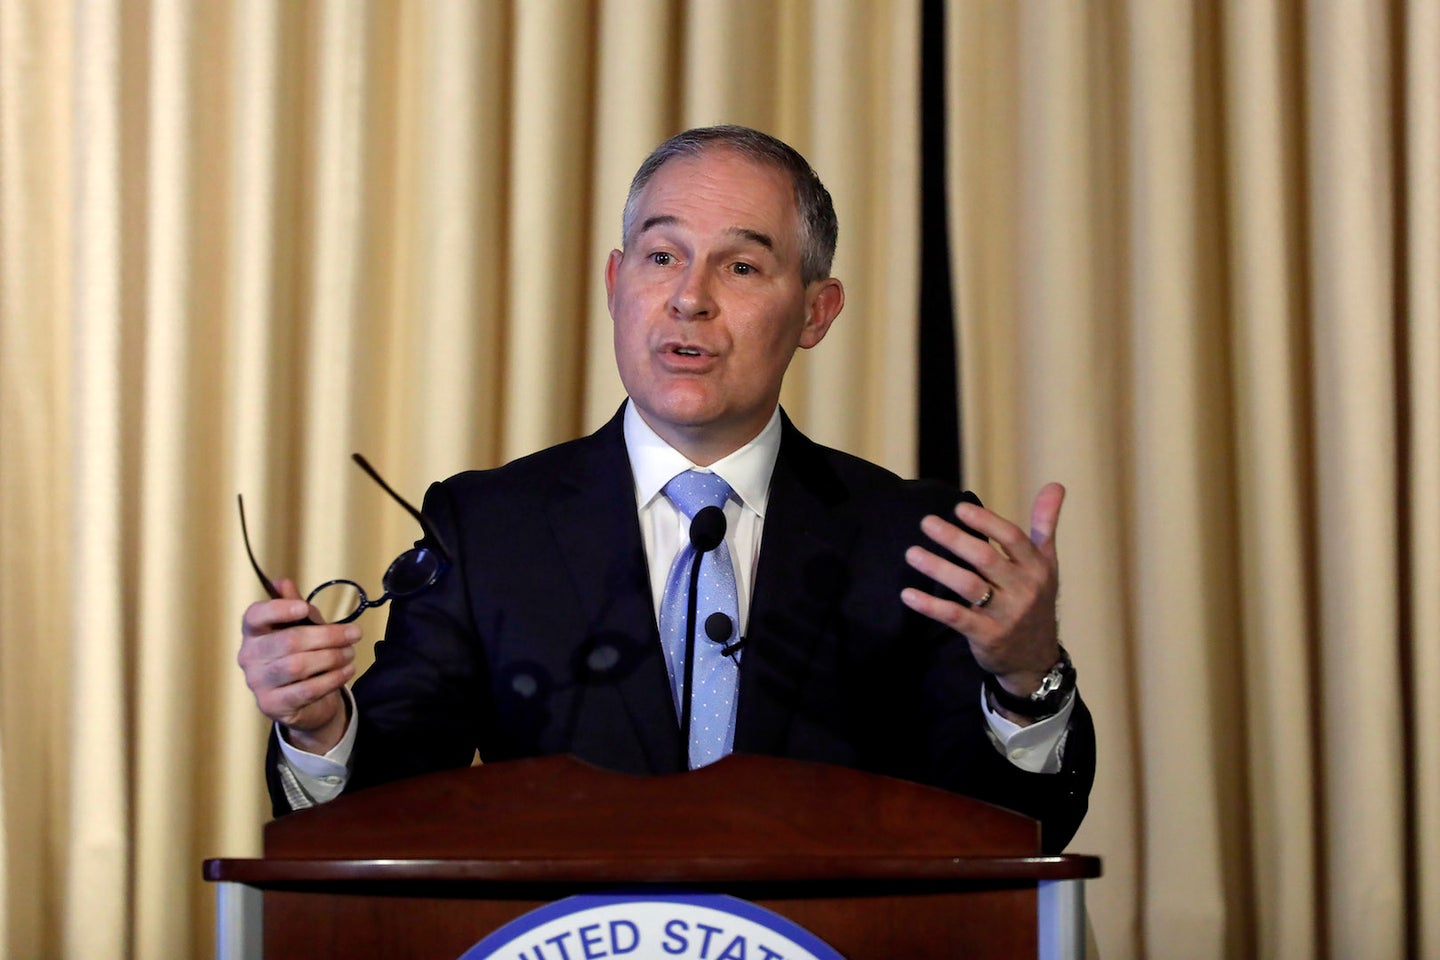 EPA Chief: Carbon Dioxide Not a ‘Primary Contributor’ to Global Warming